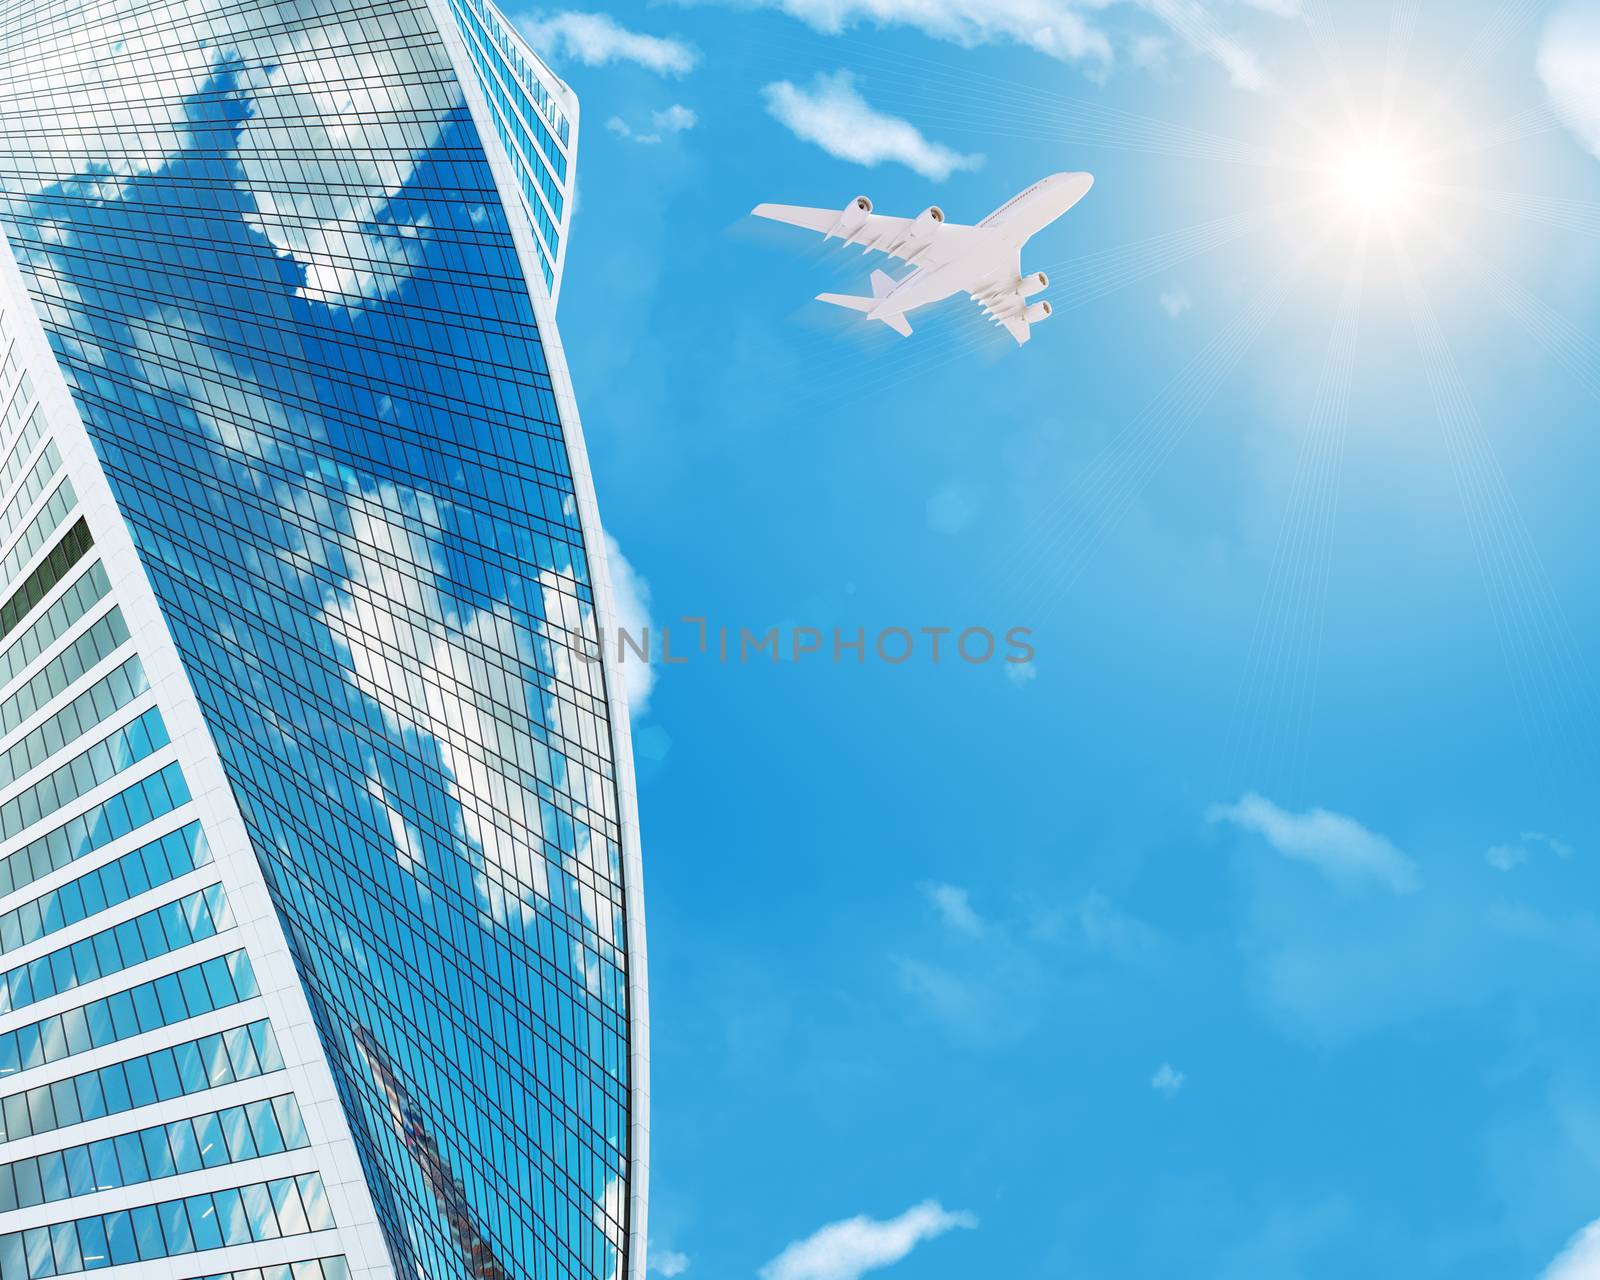 Skyscraper with jet in sky with sun and clouds, business concept